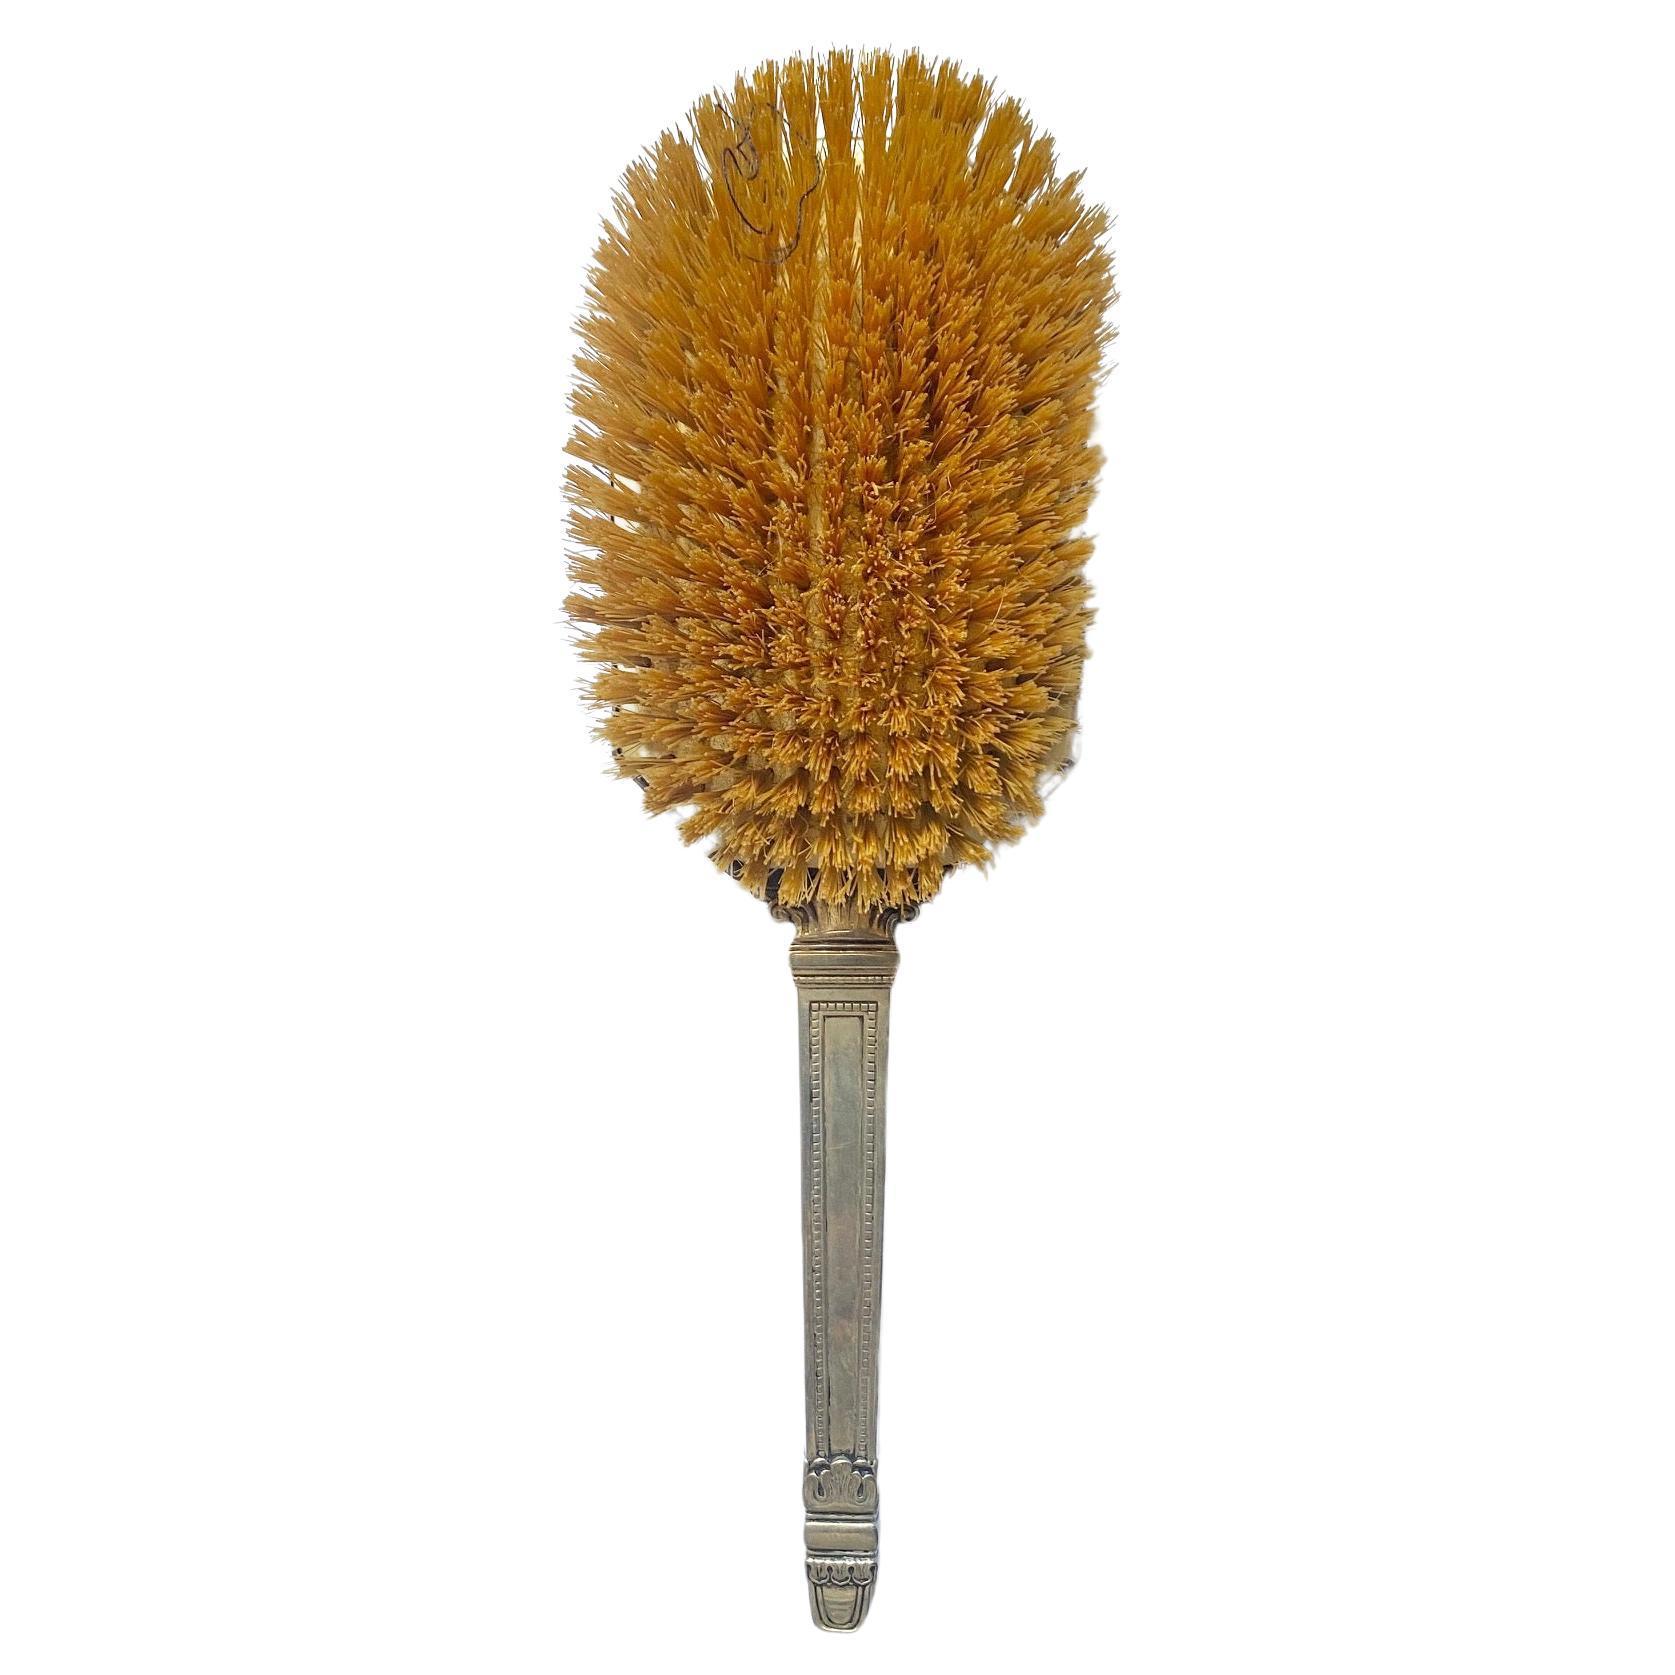 1920s Tiffany & Co Silver 925 Hair Brush in good condition, brush is made of real horse hair, comes with certificate of authenticity 
24x8.5x4cm 